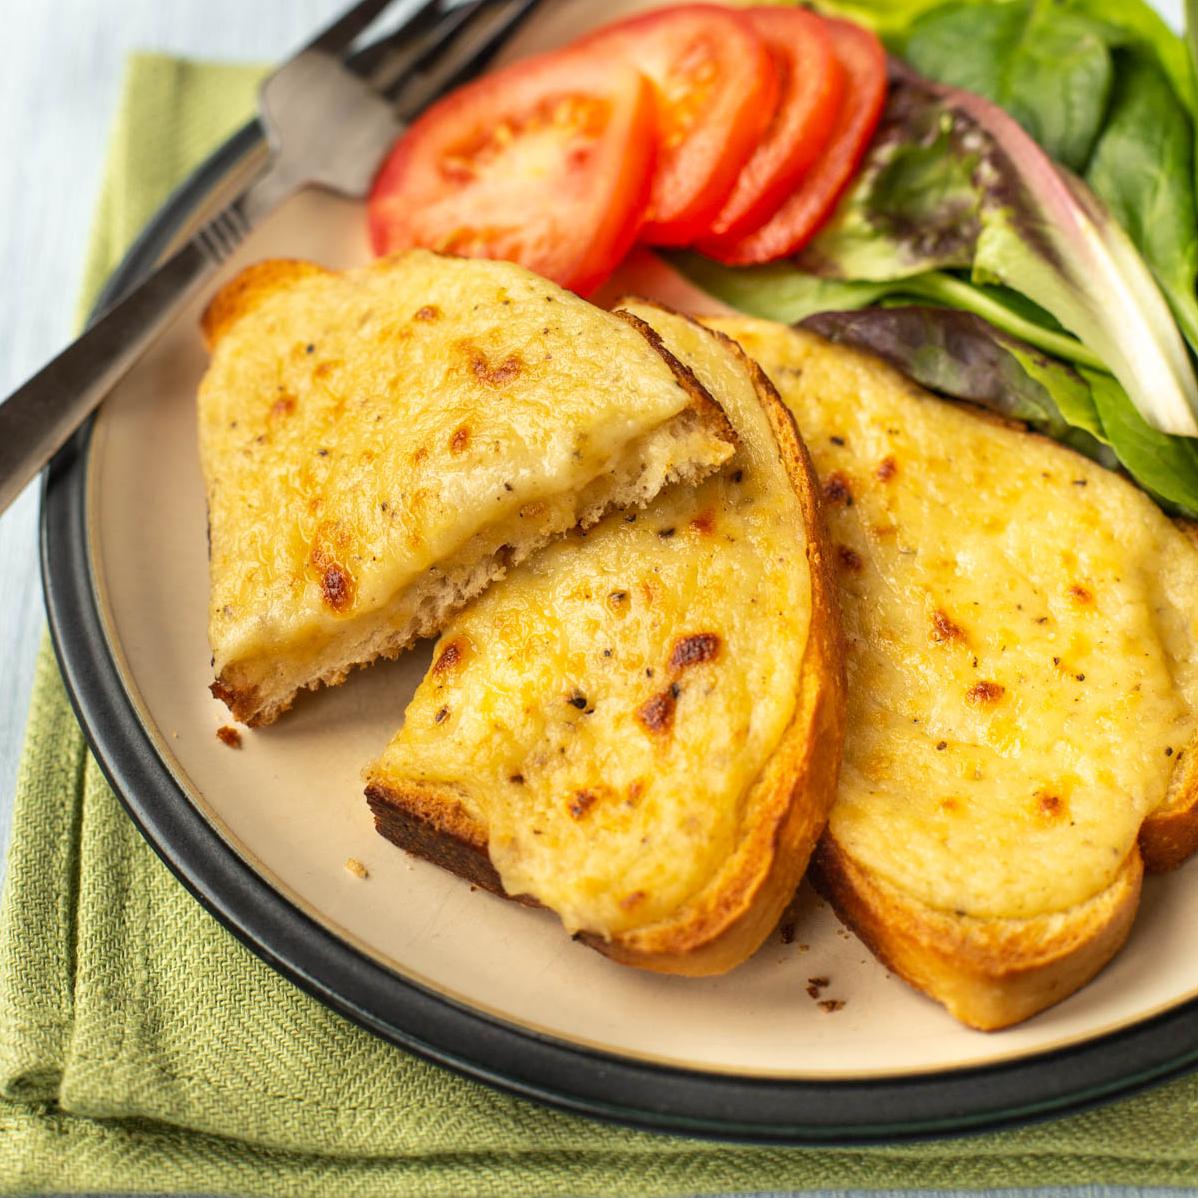  Get ready to indulge in a traditional Welsh Rarebit, a classic and comforting British dish that is sure to satisfy any cravings.